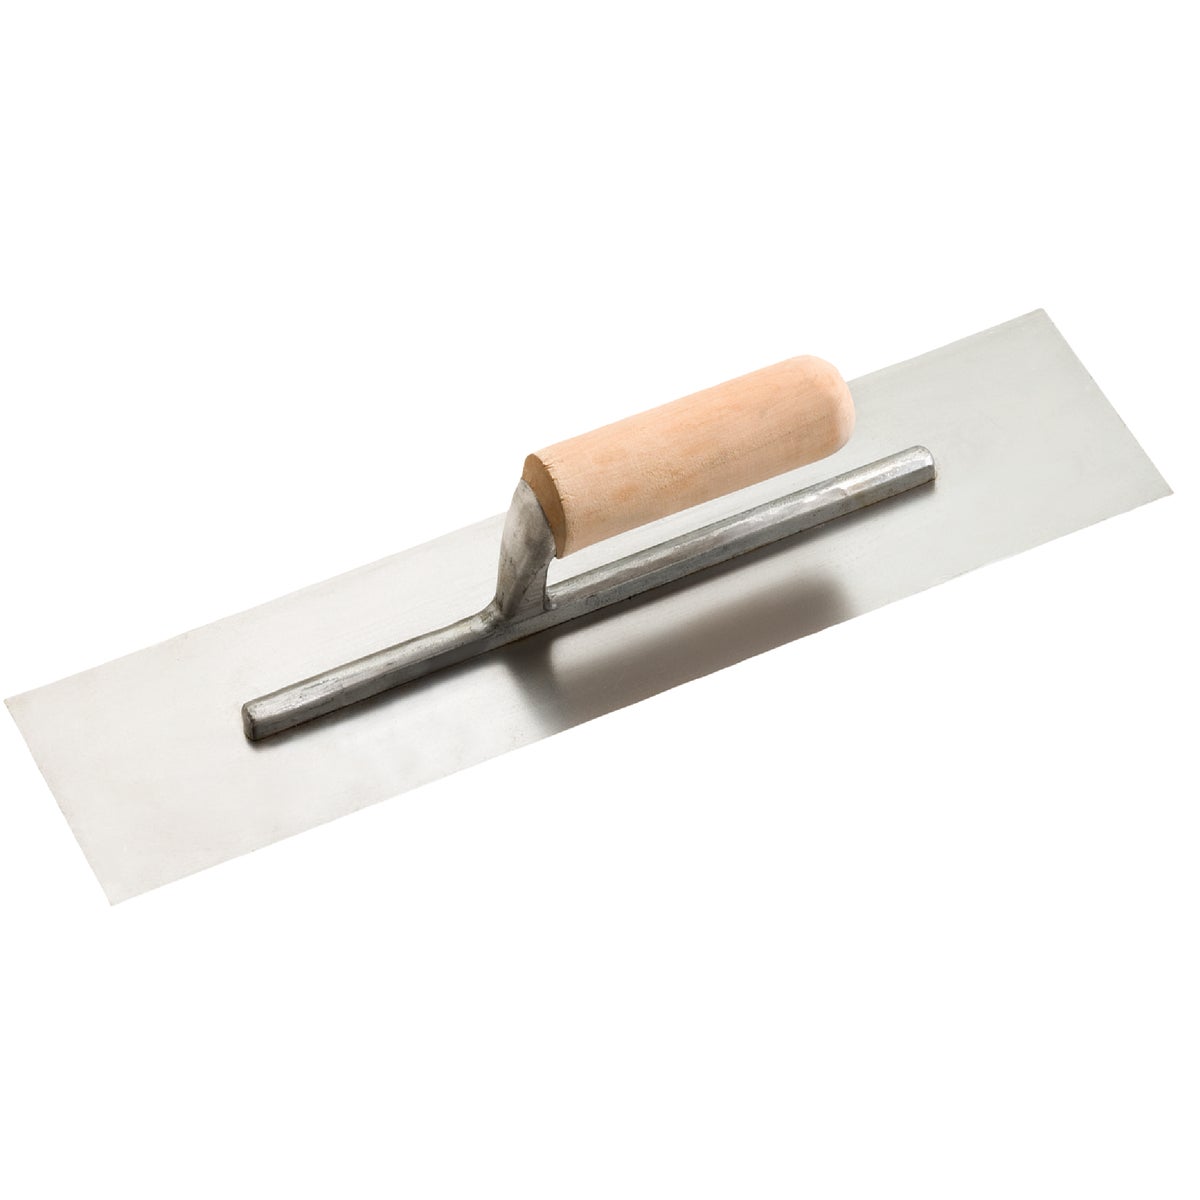 Do it 4 In. x 16 In. Finishing Trowel with Basswood Handle